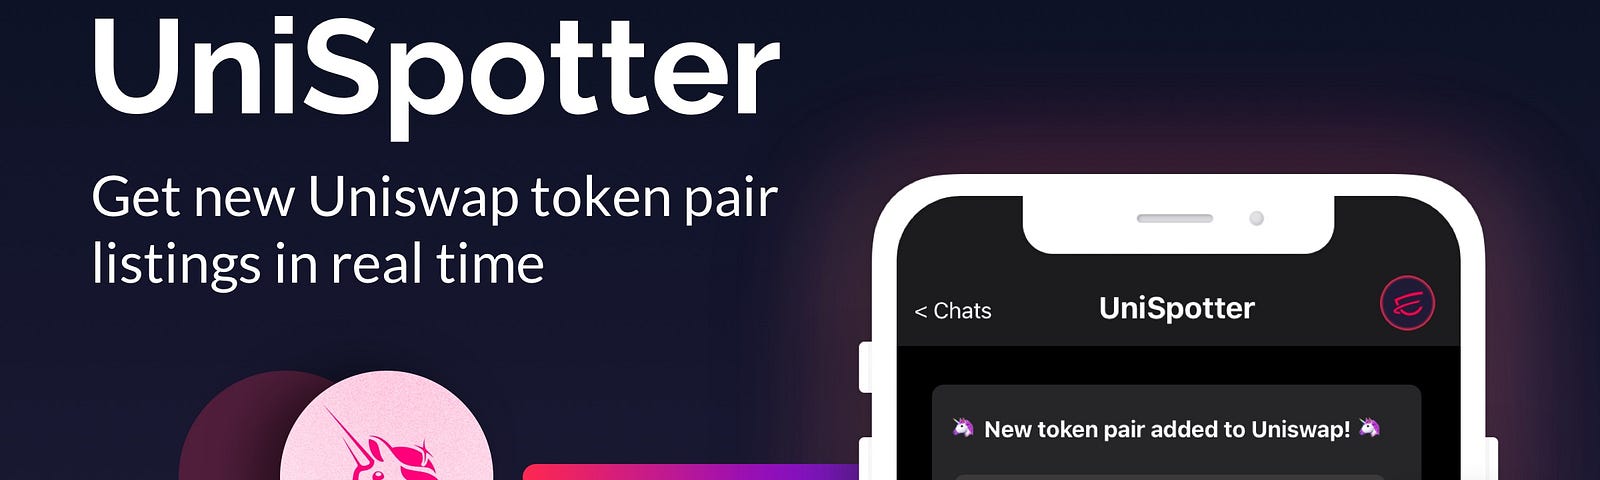 UniSpotter a Telegram bot by Esprezzo for getting new token pairs in real-time. Image of phone with Telegram & Uniswap logos